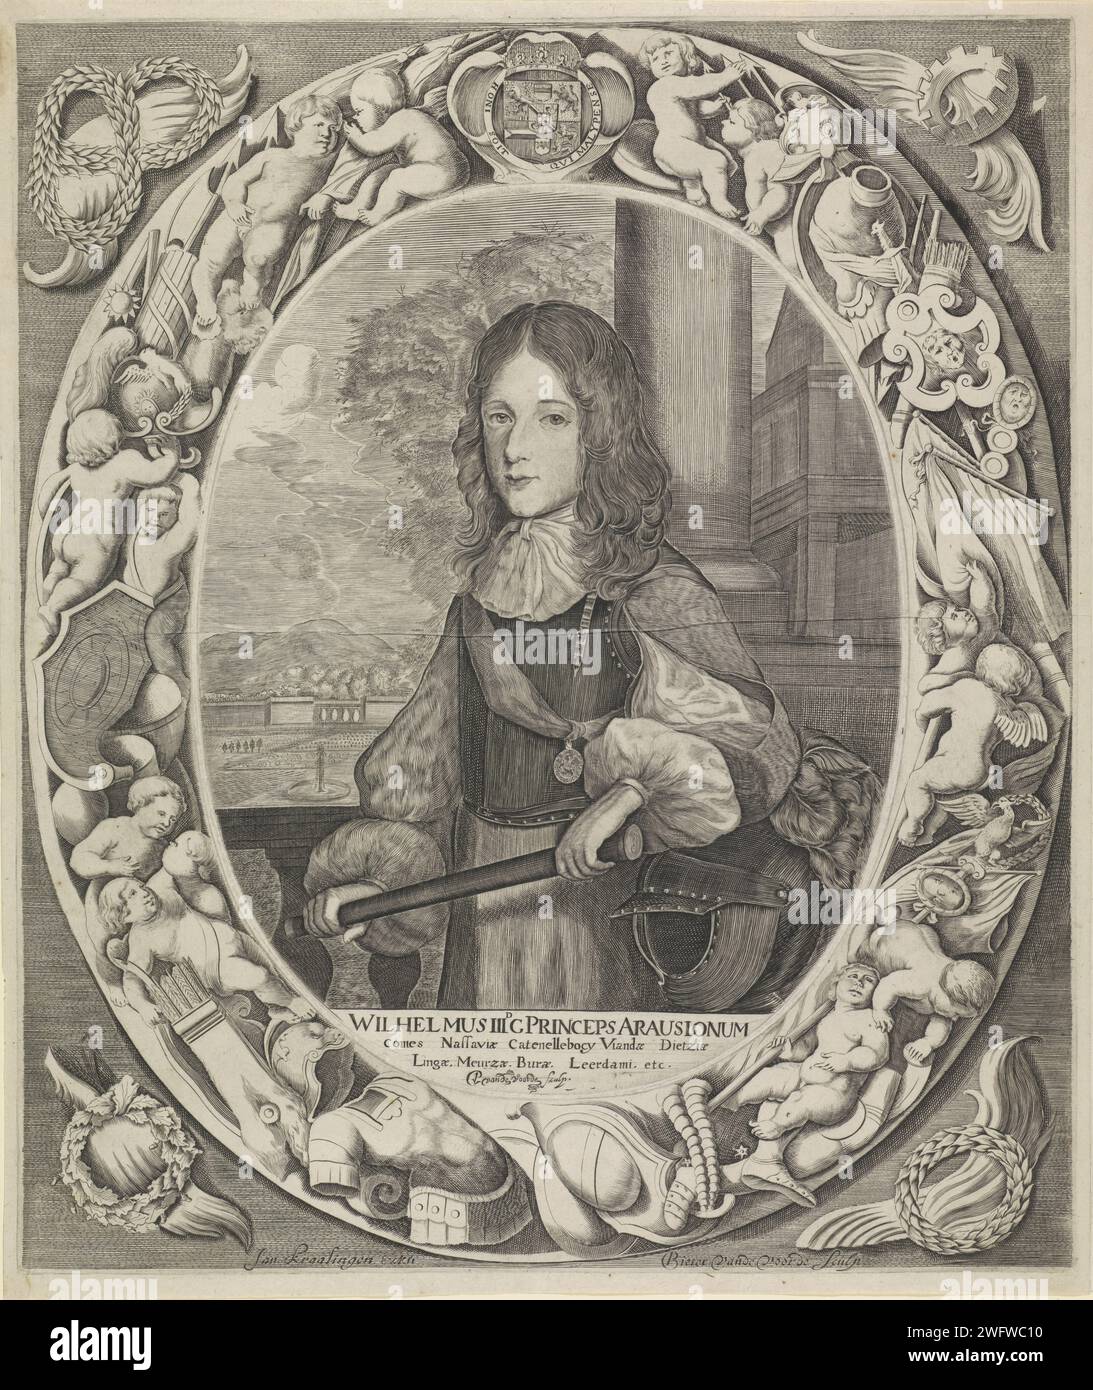 Portrait of Willem III, Prince of Orange, Peter van Voorde, after Pieter Philippe, after Abraham Ragueneau, after Pieter Claesz. Soutman, c. 1665 - c. 1670 print Portrait of Willem III. He leans on a helmet. A commandostaf in his hands. A garden in the background. In a frame are name and titles. Entirely in a separate engraved vertamated oval list of putti and weapon. In the middle of his weapon with a crown, decorated with the garter and the motto of the order of the garter. print maker: Amsterdampublisher: Low Countries paper engraving / etching knighthood order (GARTER) - insignia of a knig Stock Photo